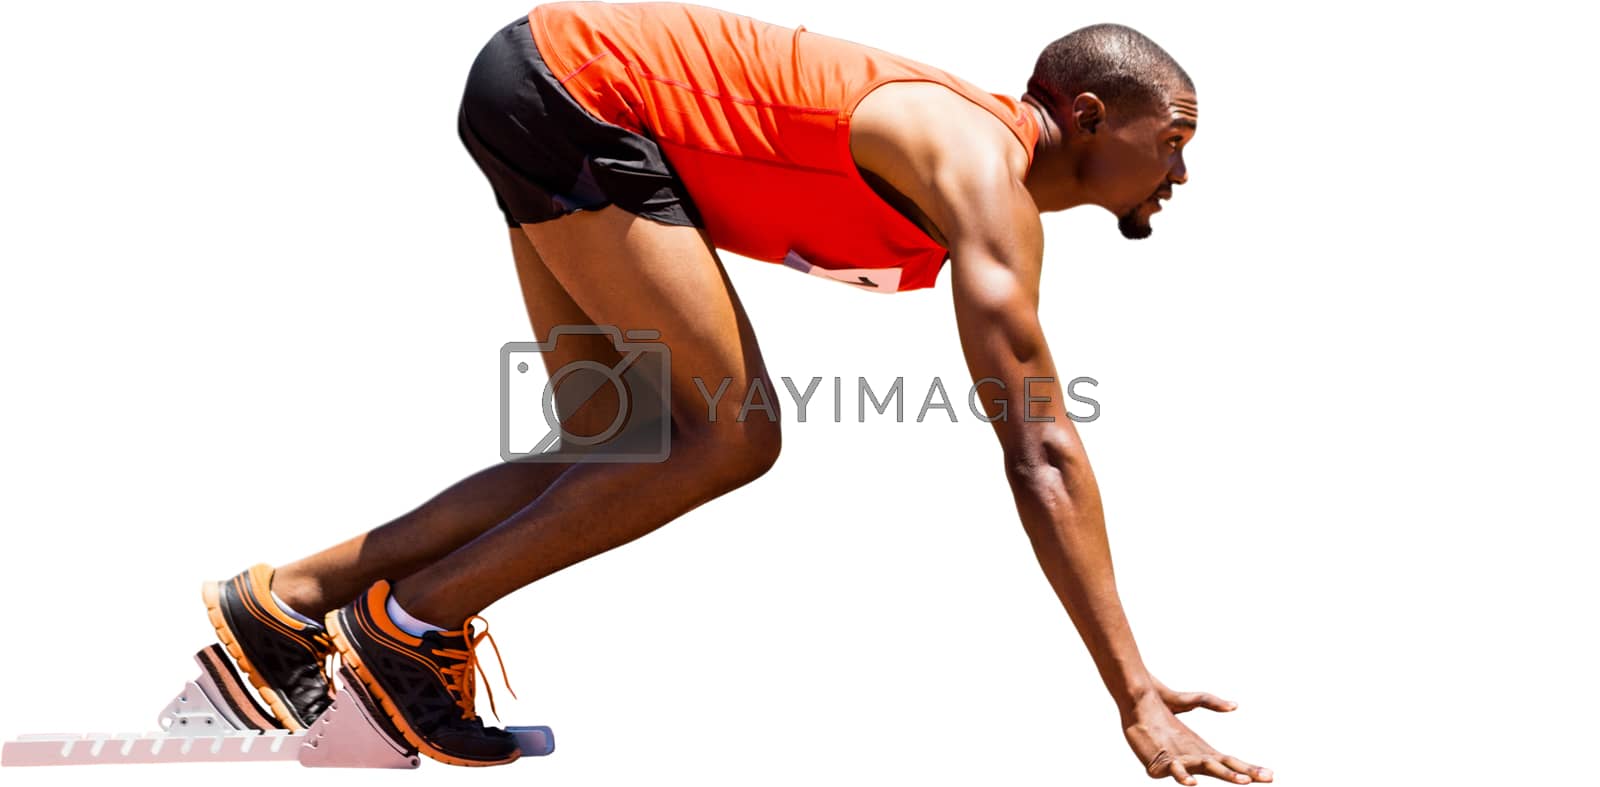 Royalty free image of Profile view of runner preparing for the start  by Wavebreakmedia